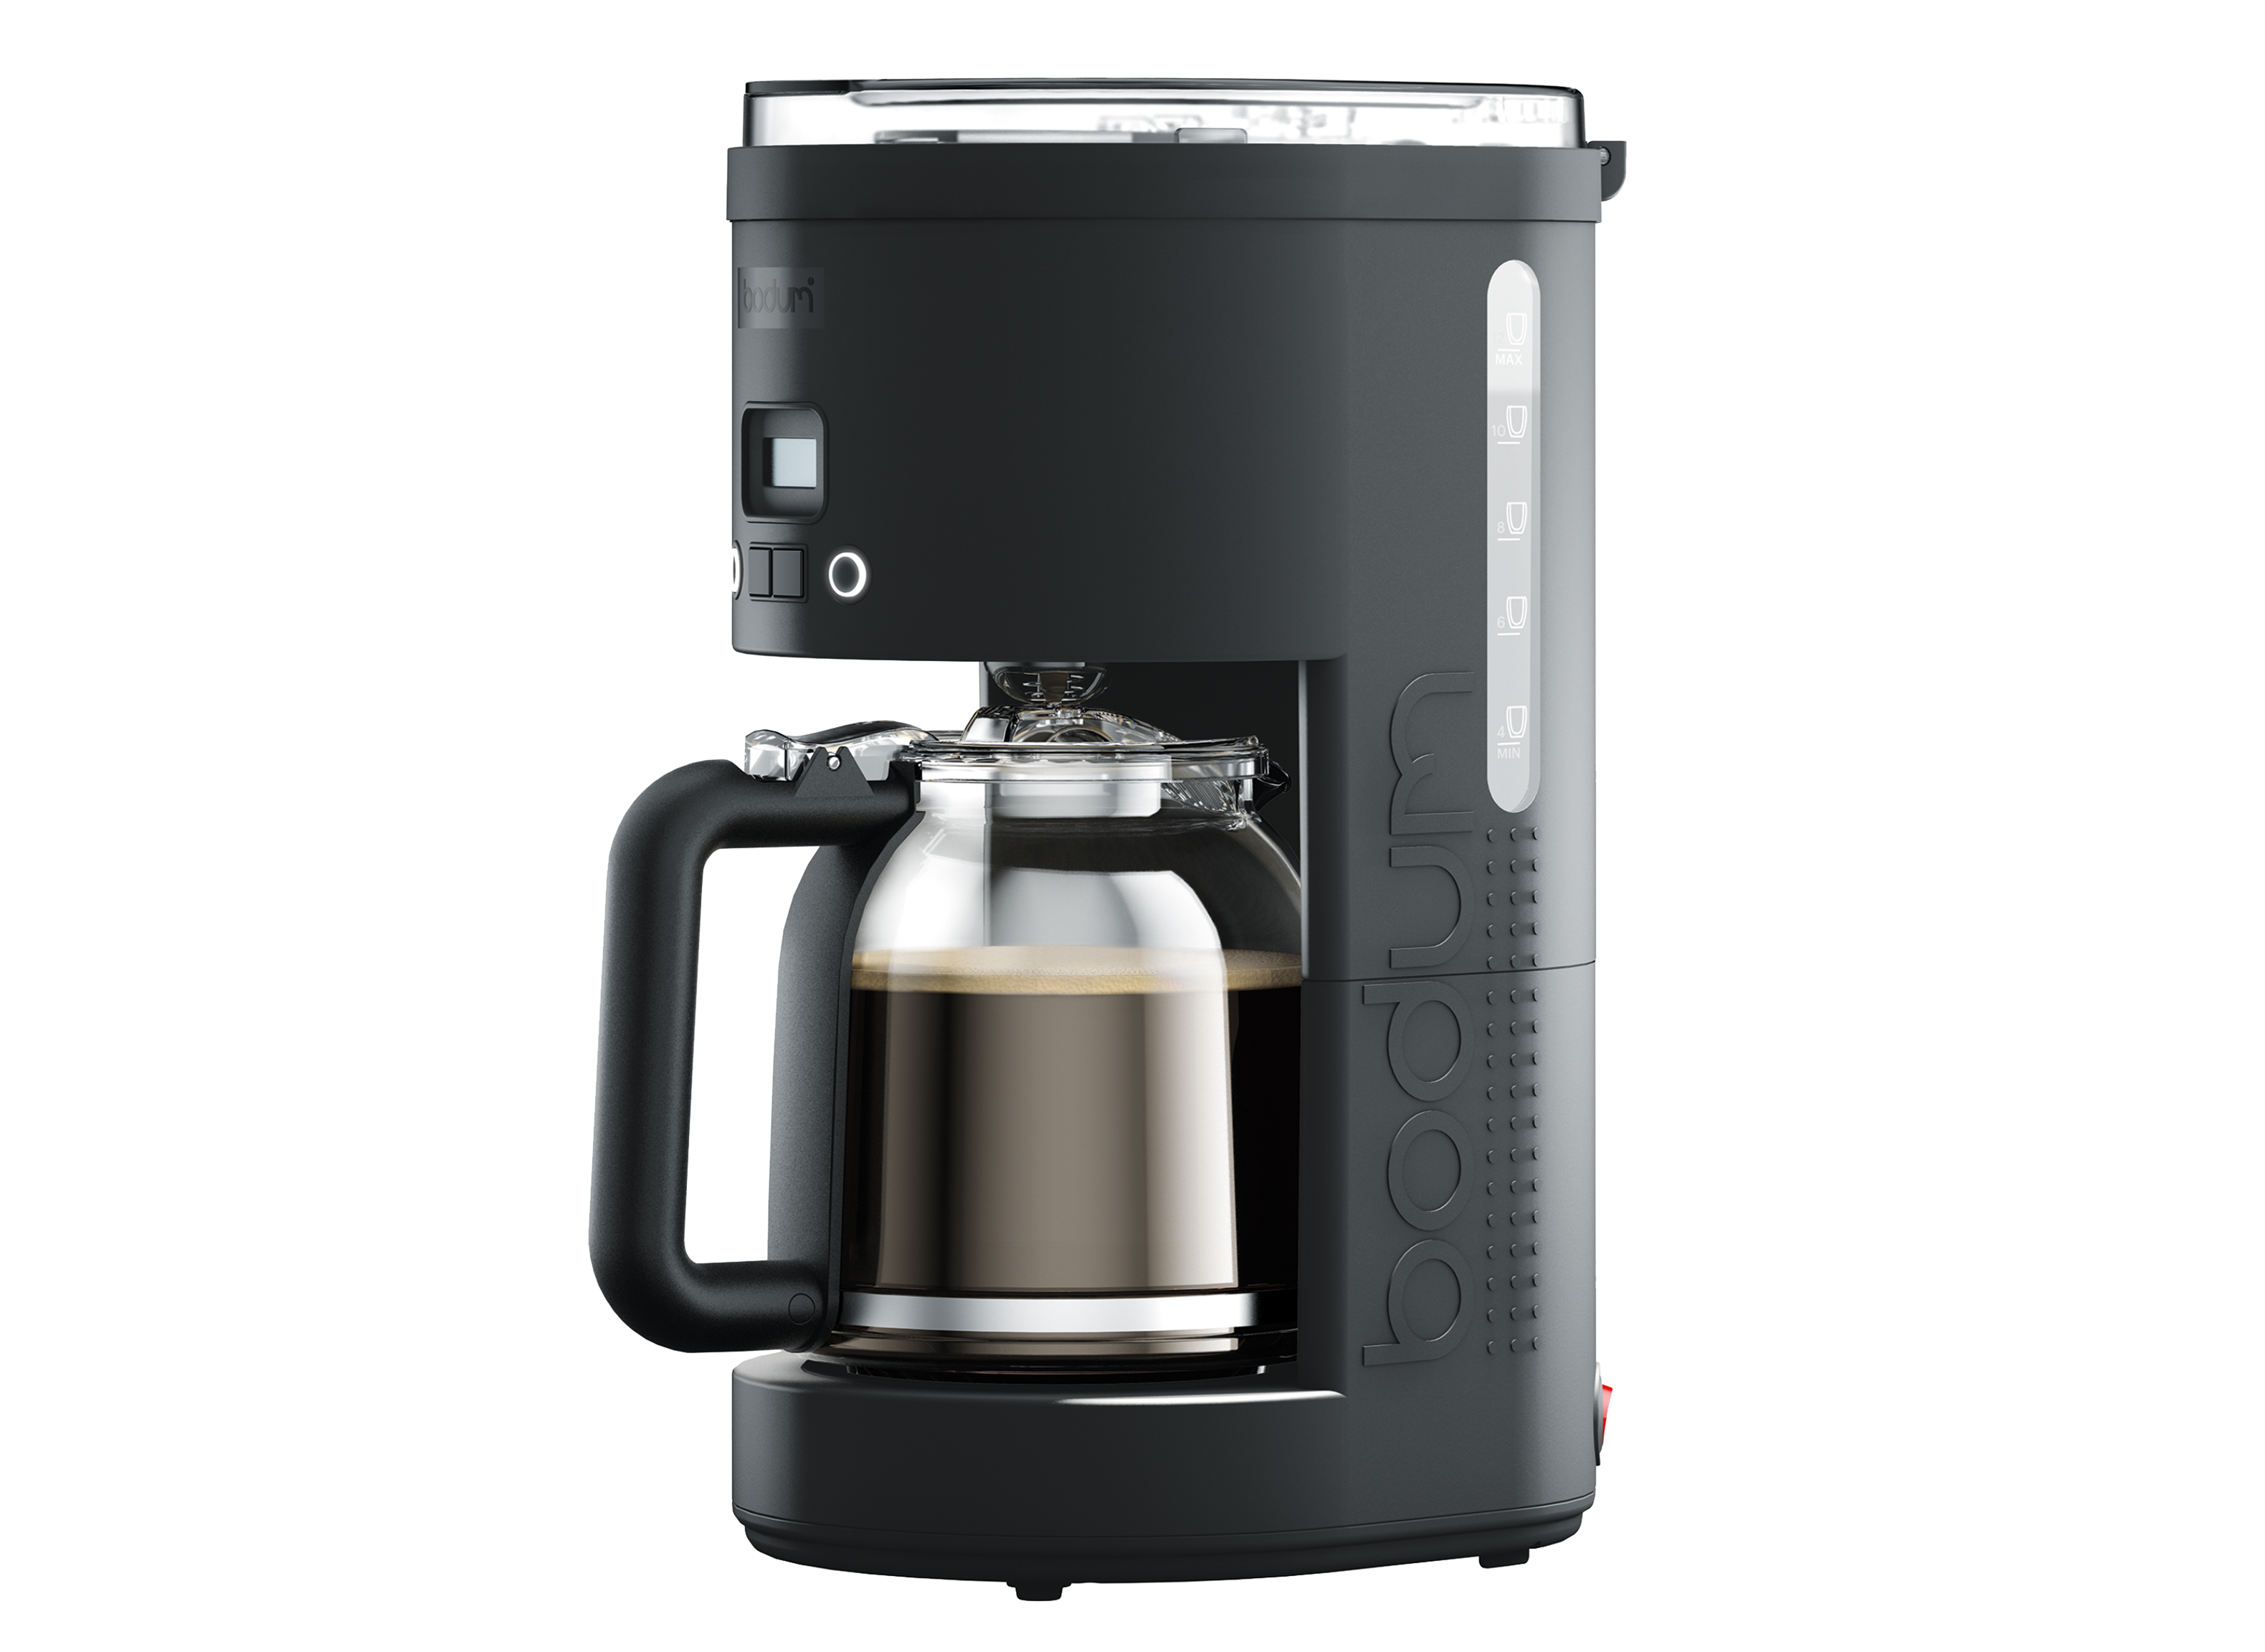 https://crdms.images.consumerreports.org/prod/products/cr/models/394018-drip-coffee-makers-with-carafe-bodum-bistro-12-cup-61397.png